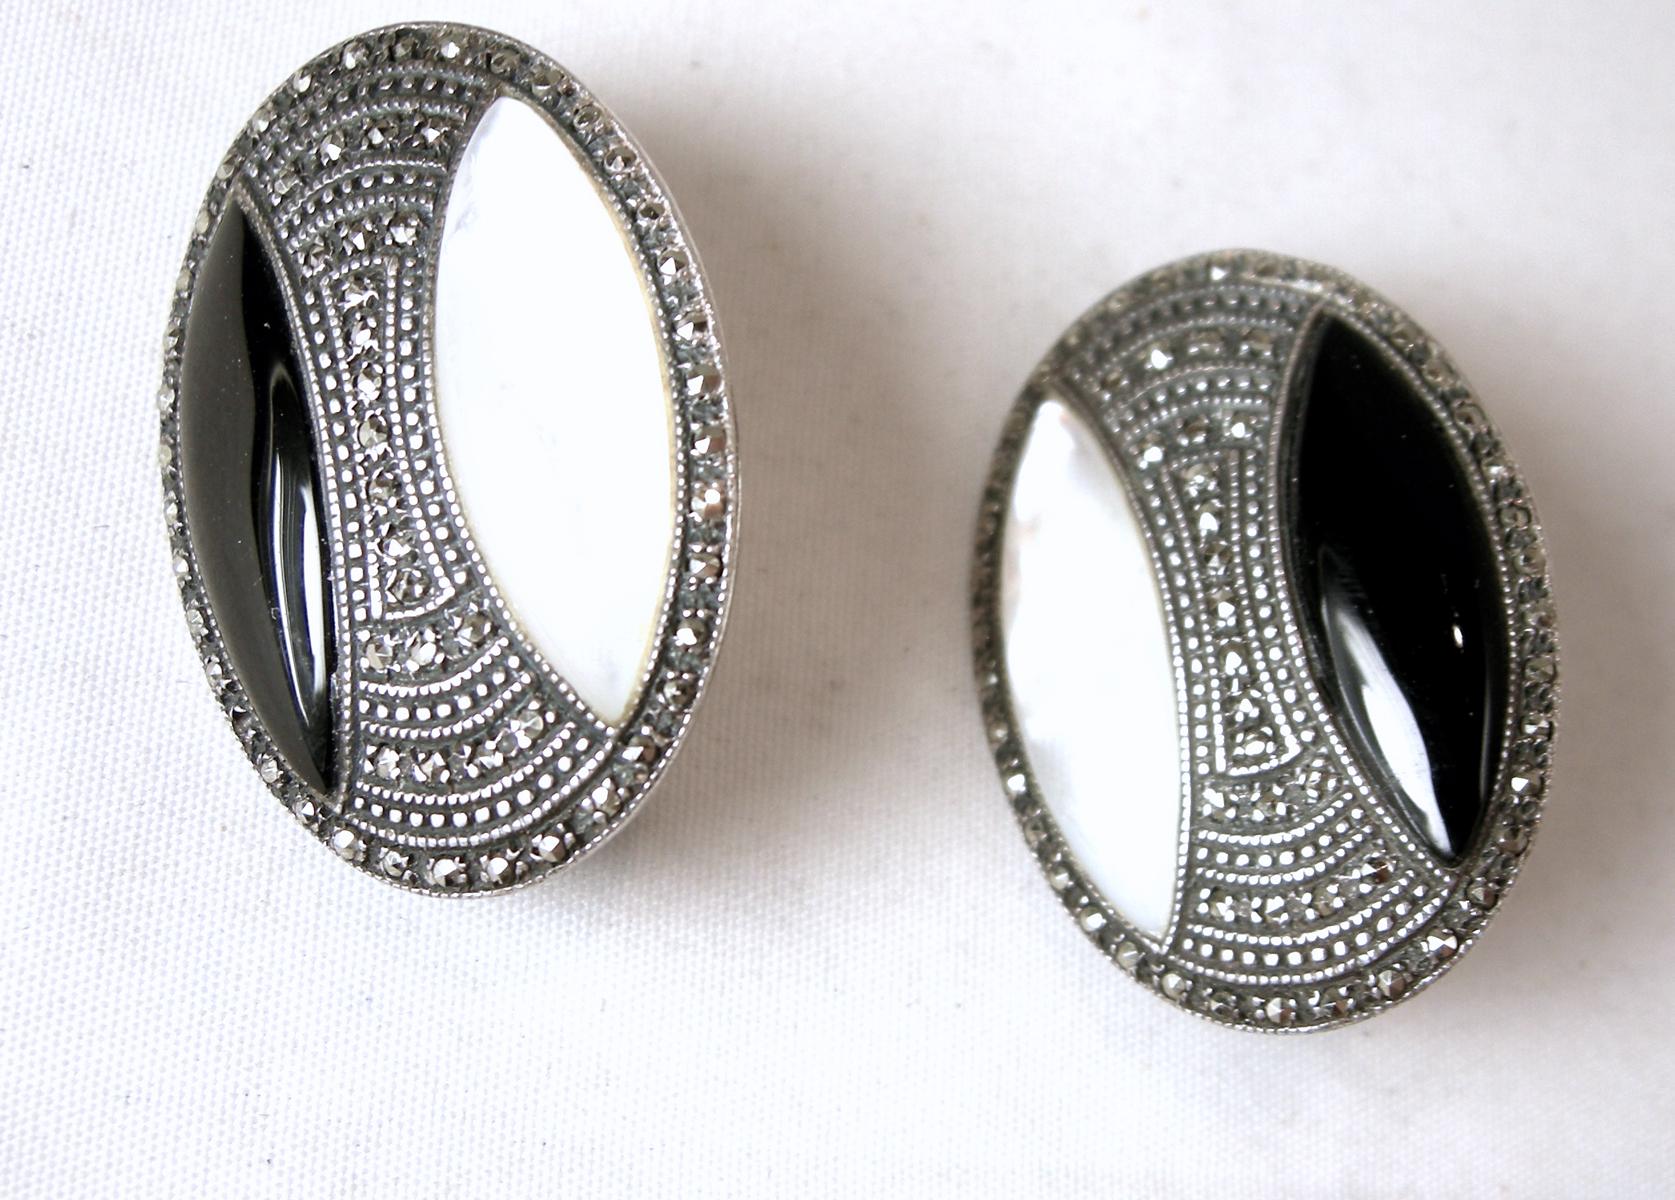 These vintage earrings feature onyx, marcasites and mother of pearl in a sterling silver setting.  In excellent condition, these clip earrings measure 1-1/4” x 7/8”.